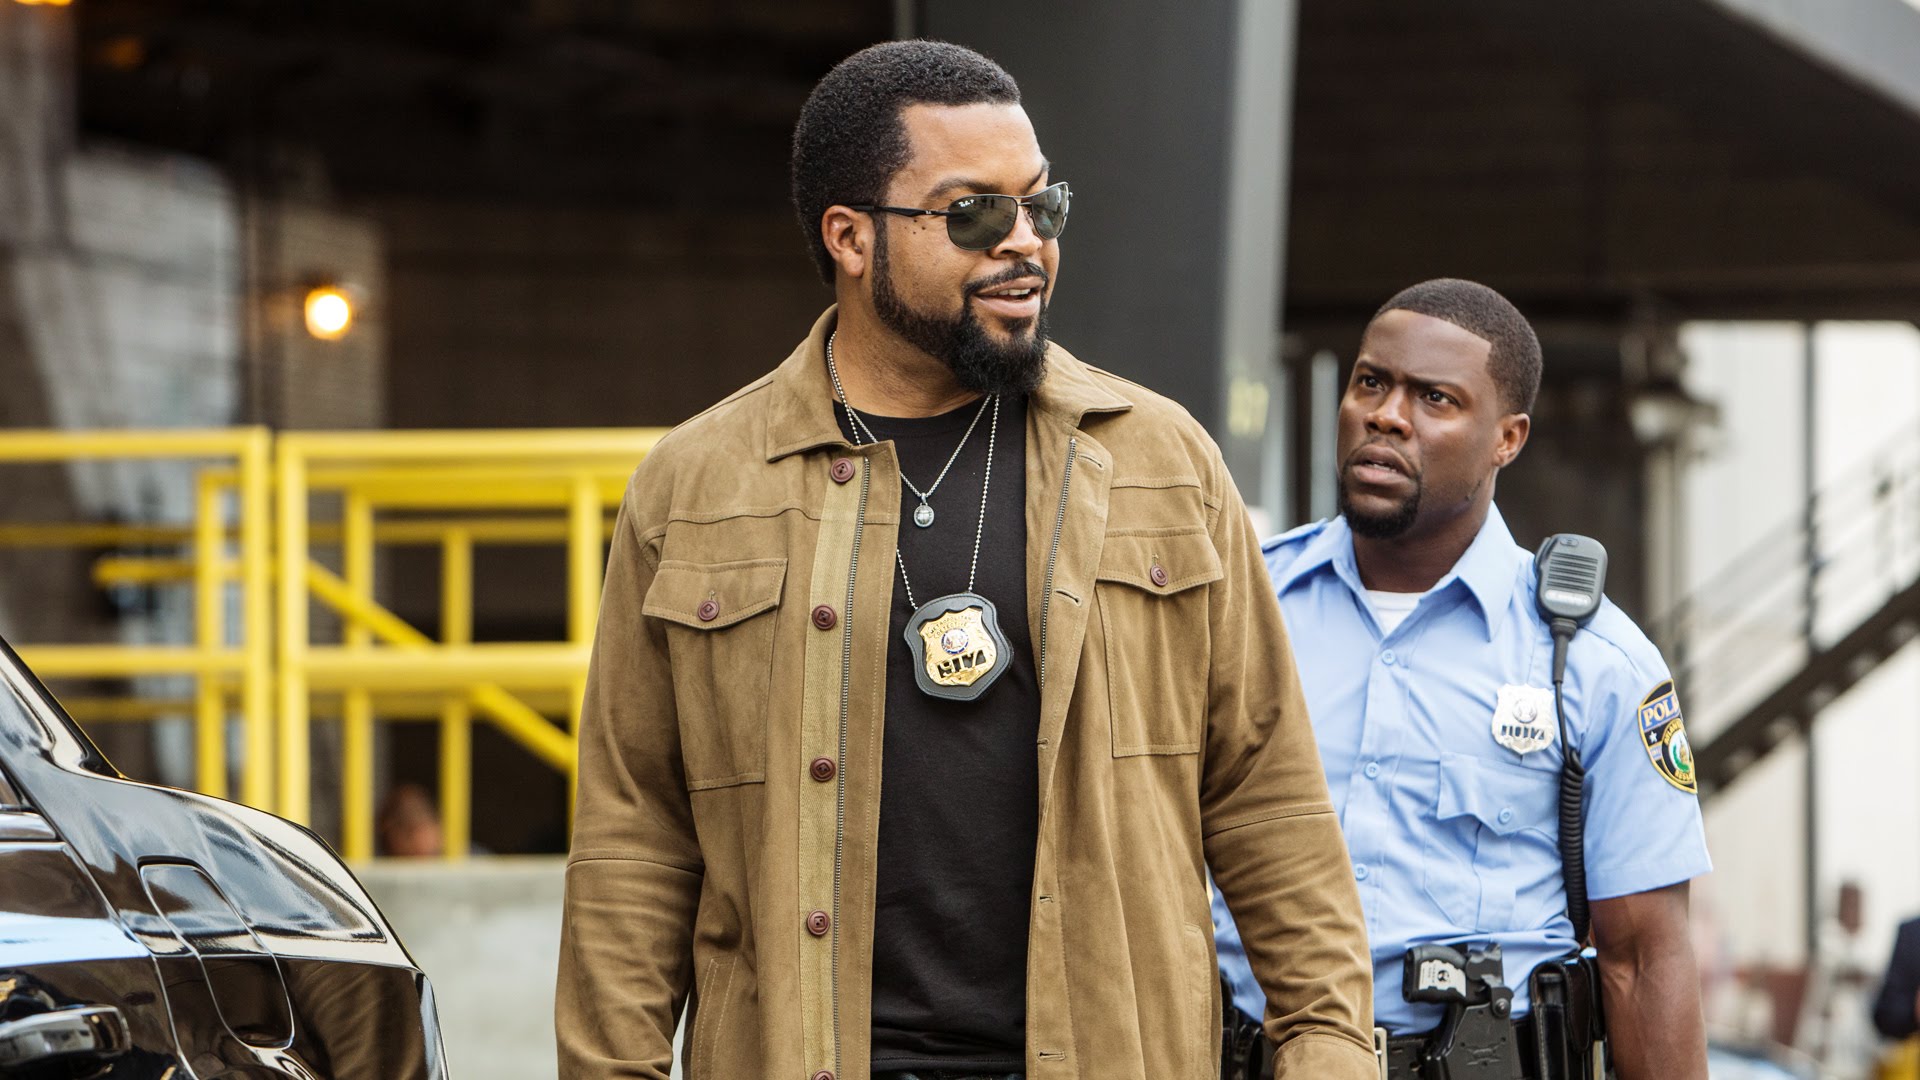 movie, ride along 2, cop, ice cube (celebrity), kevin hart, police